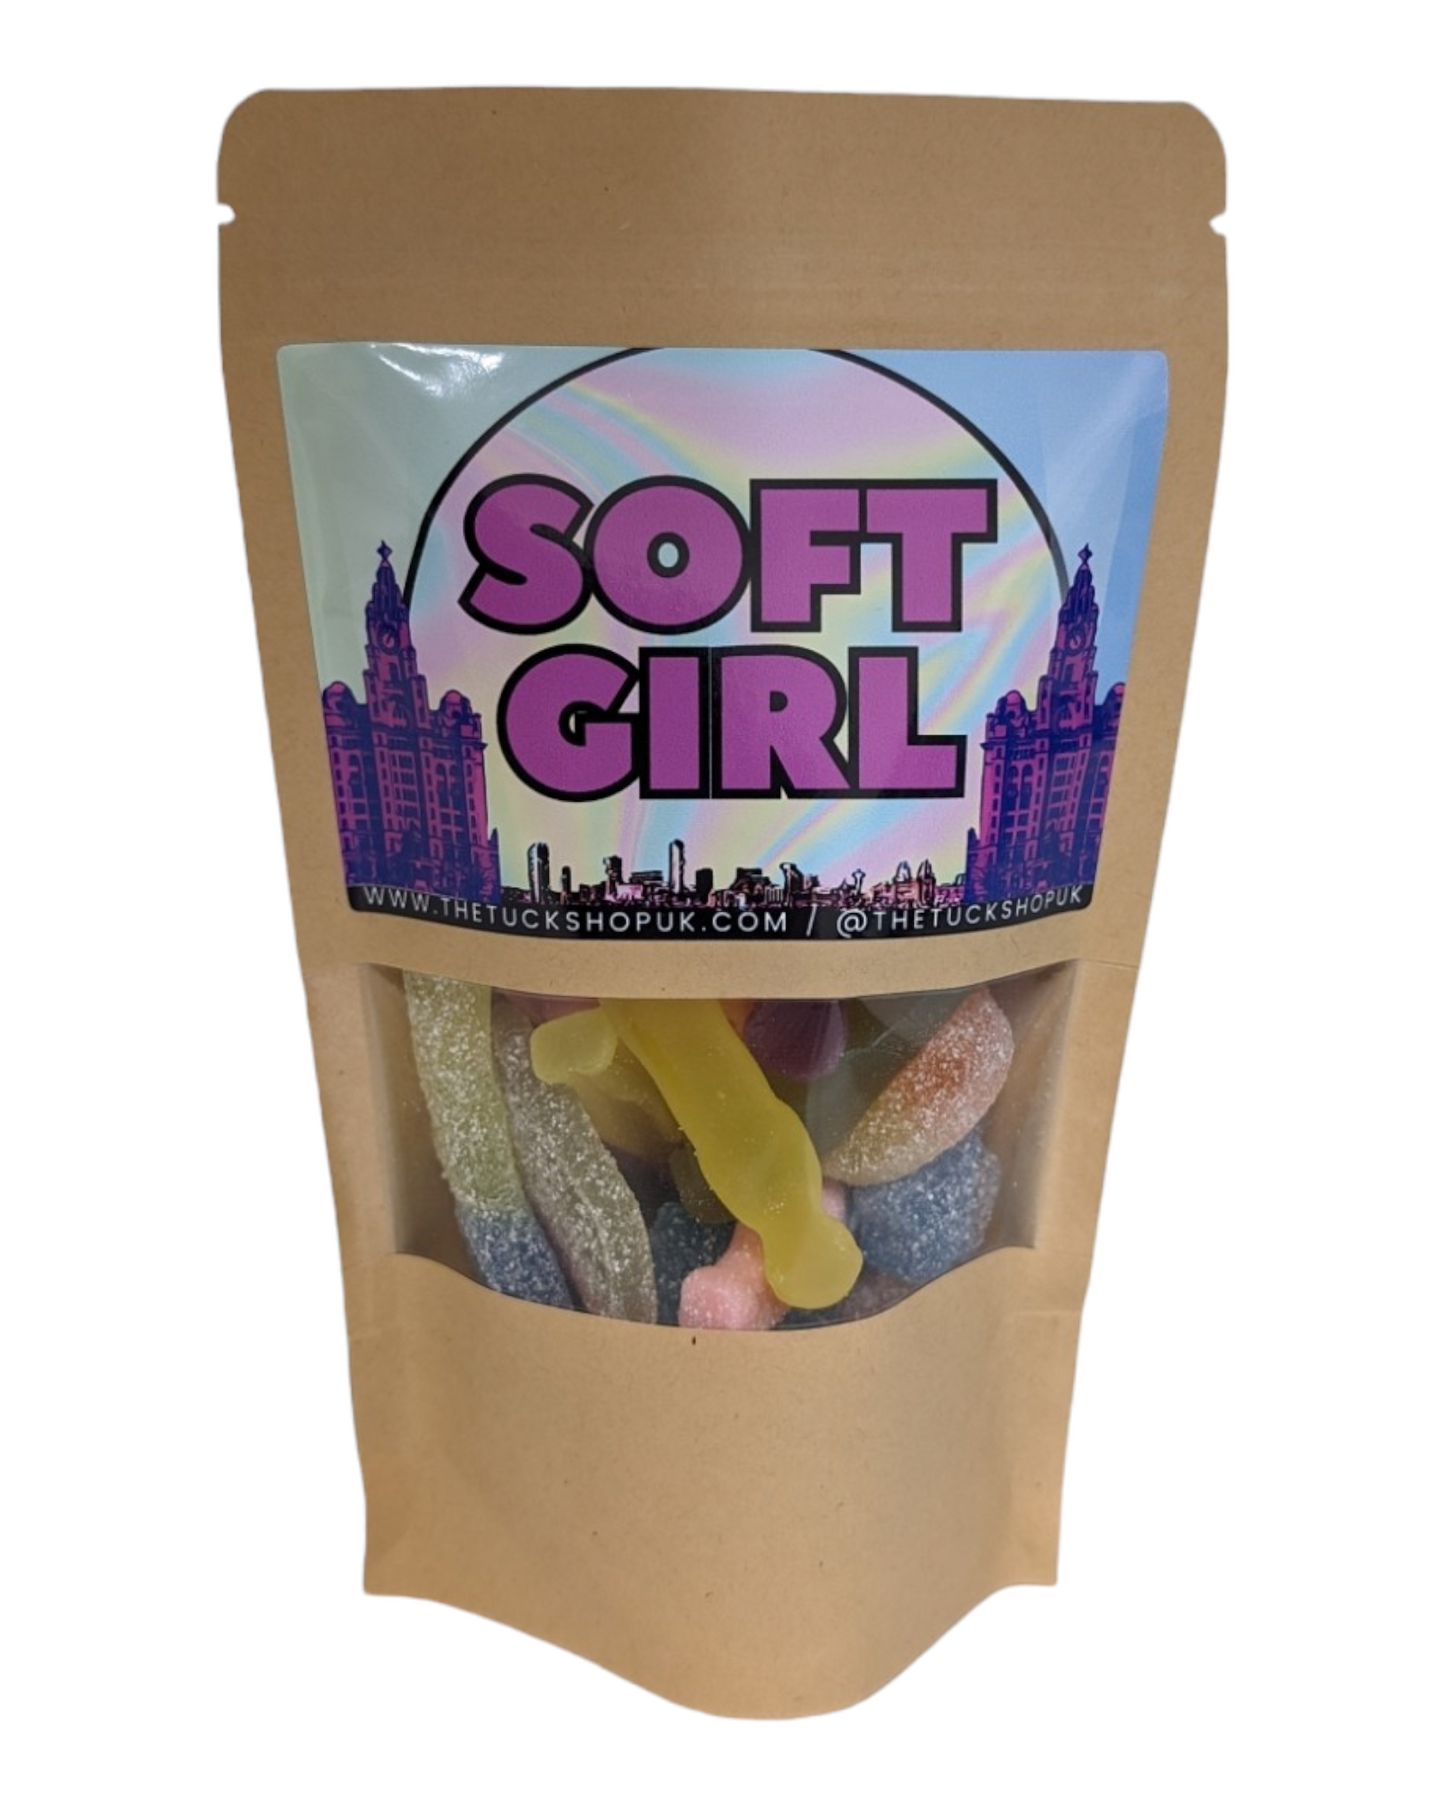 Soft Girl Gifts